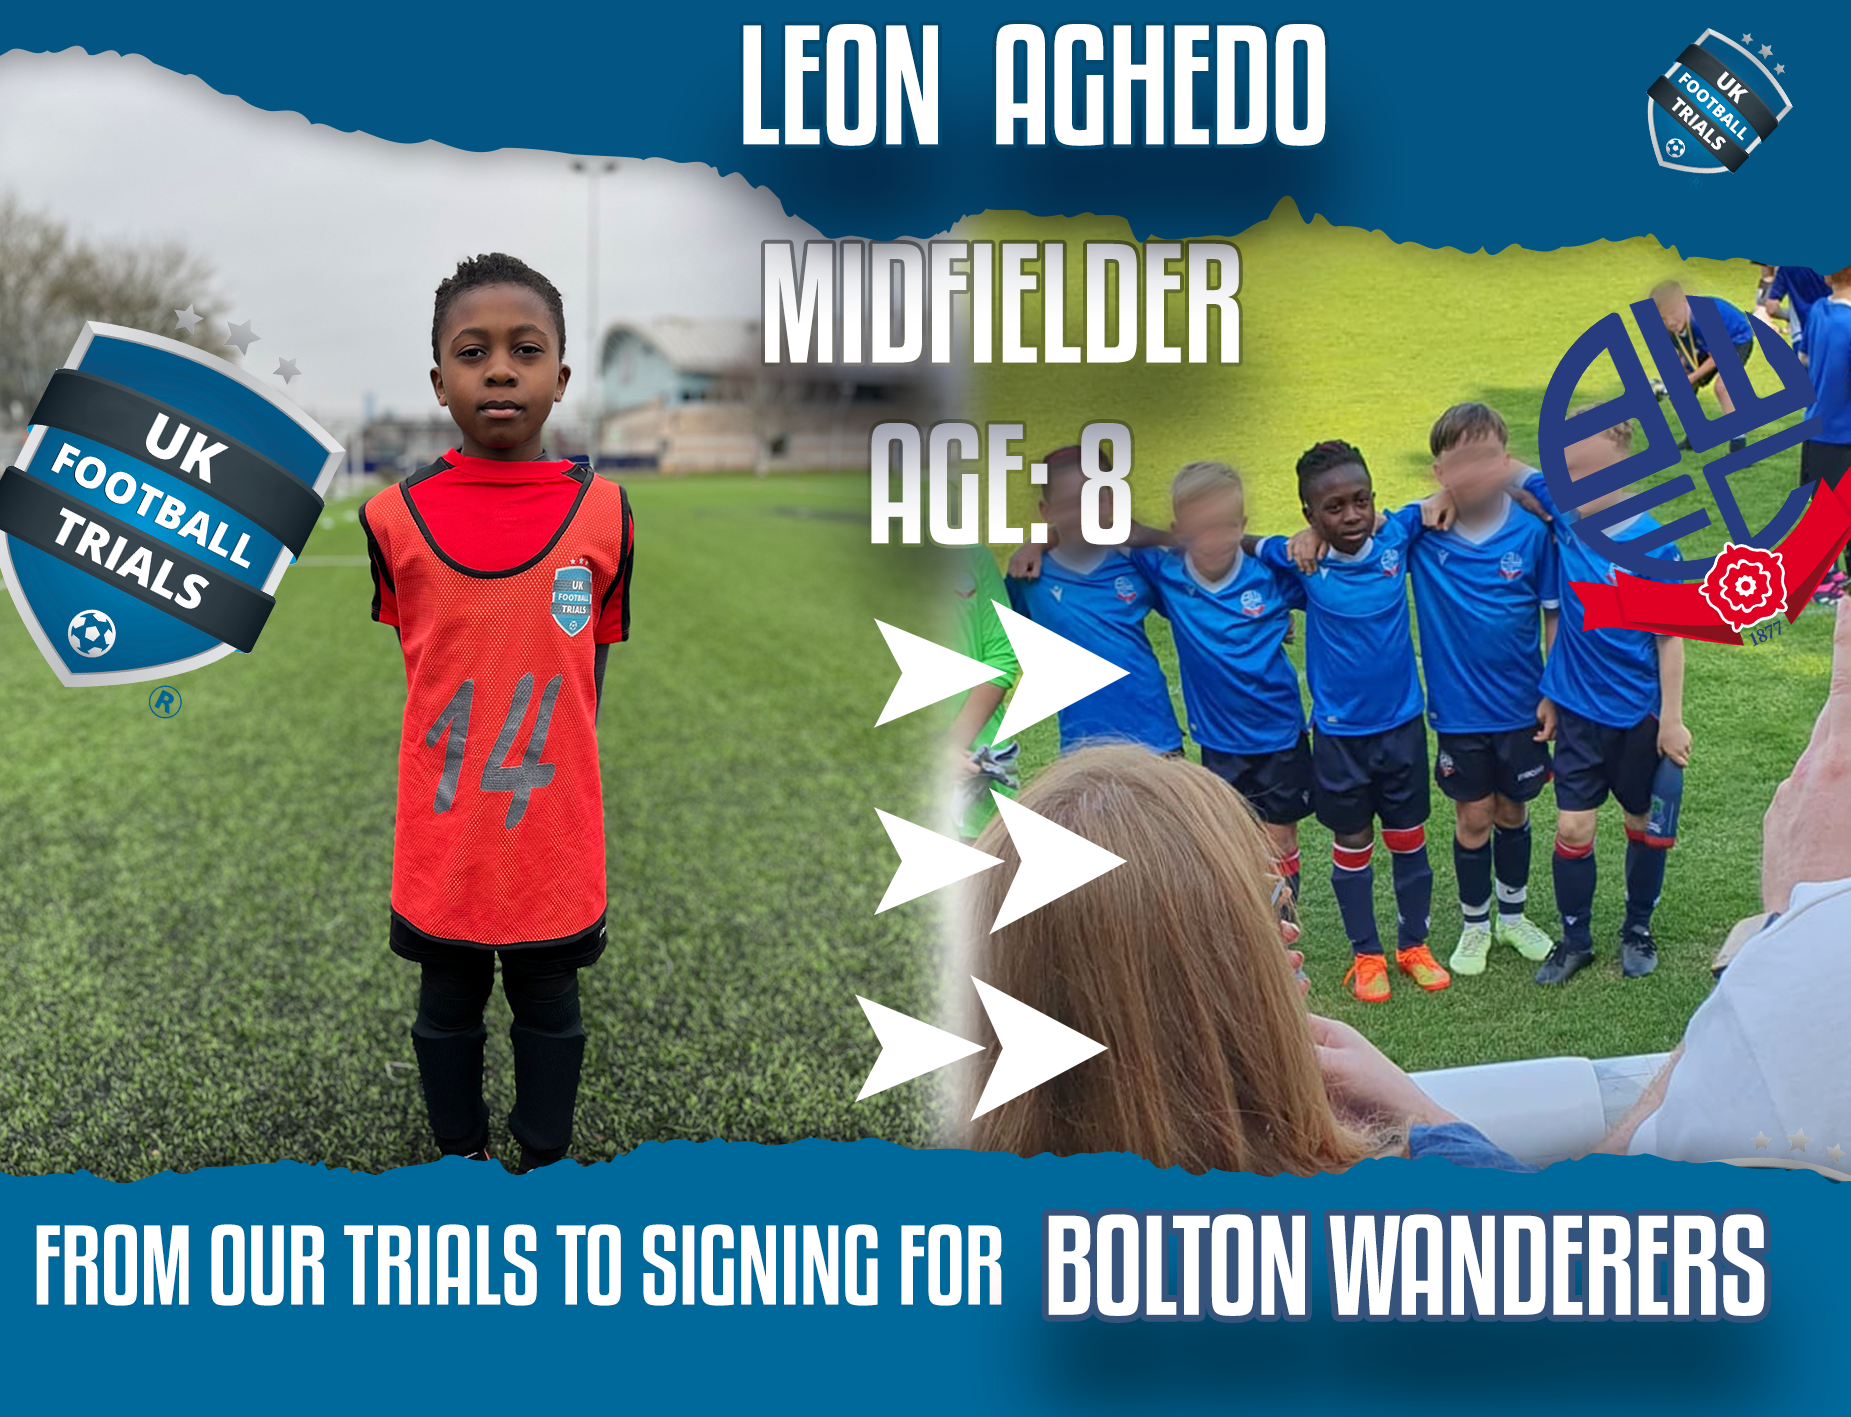 Leon Aghedo - Age 8 - Signed by Bolton Wanderers